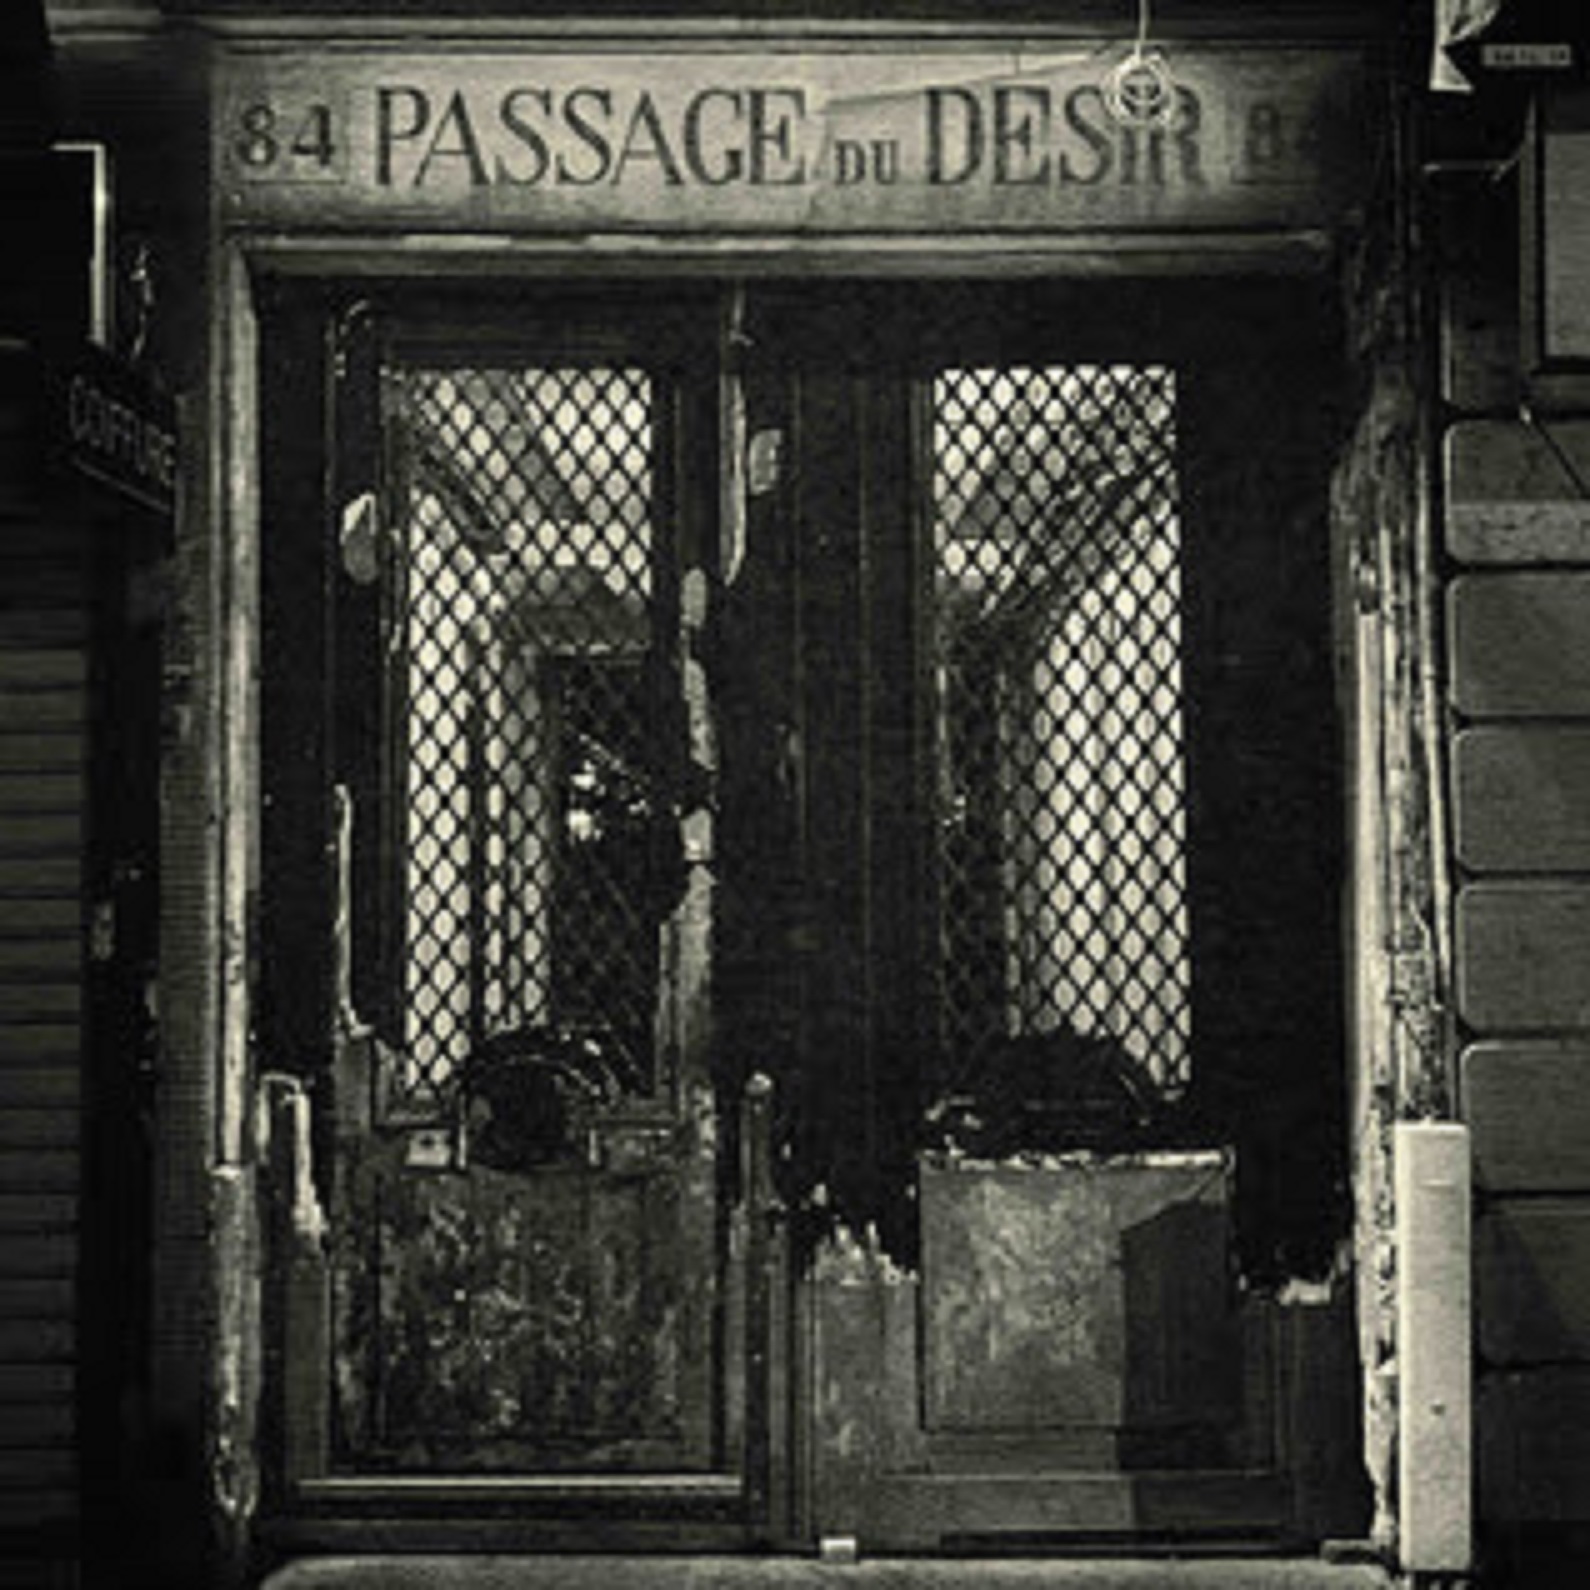 Johnny Blue Skies’ "Passage Du Desir" out today